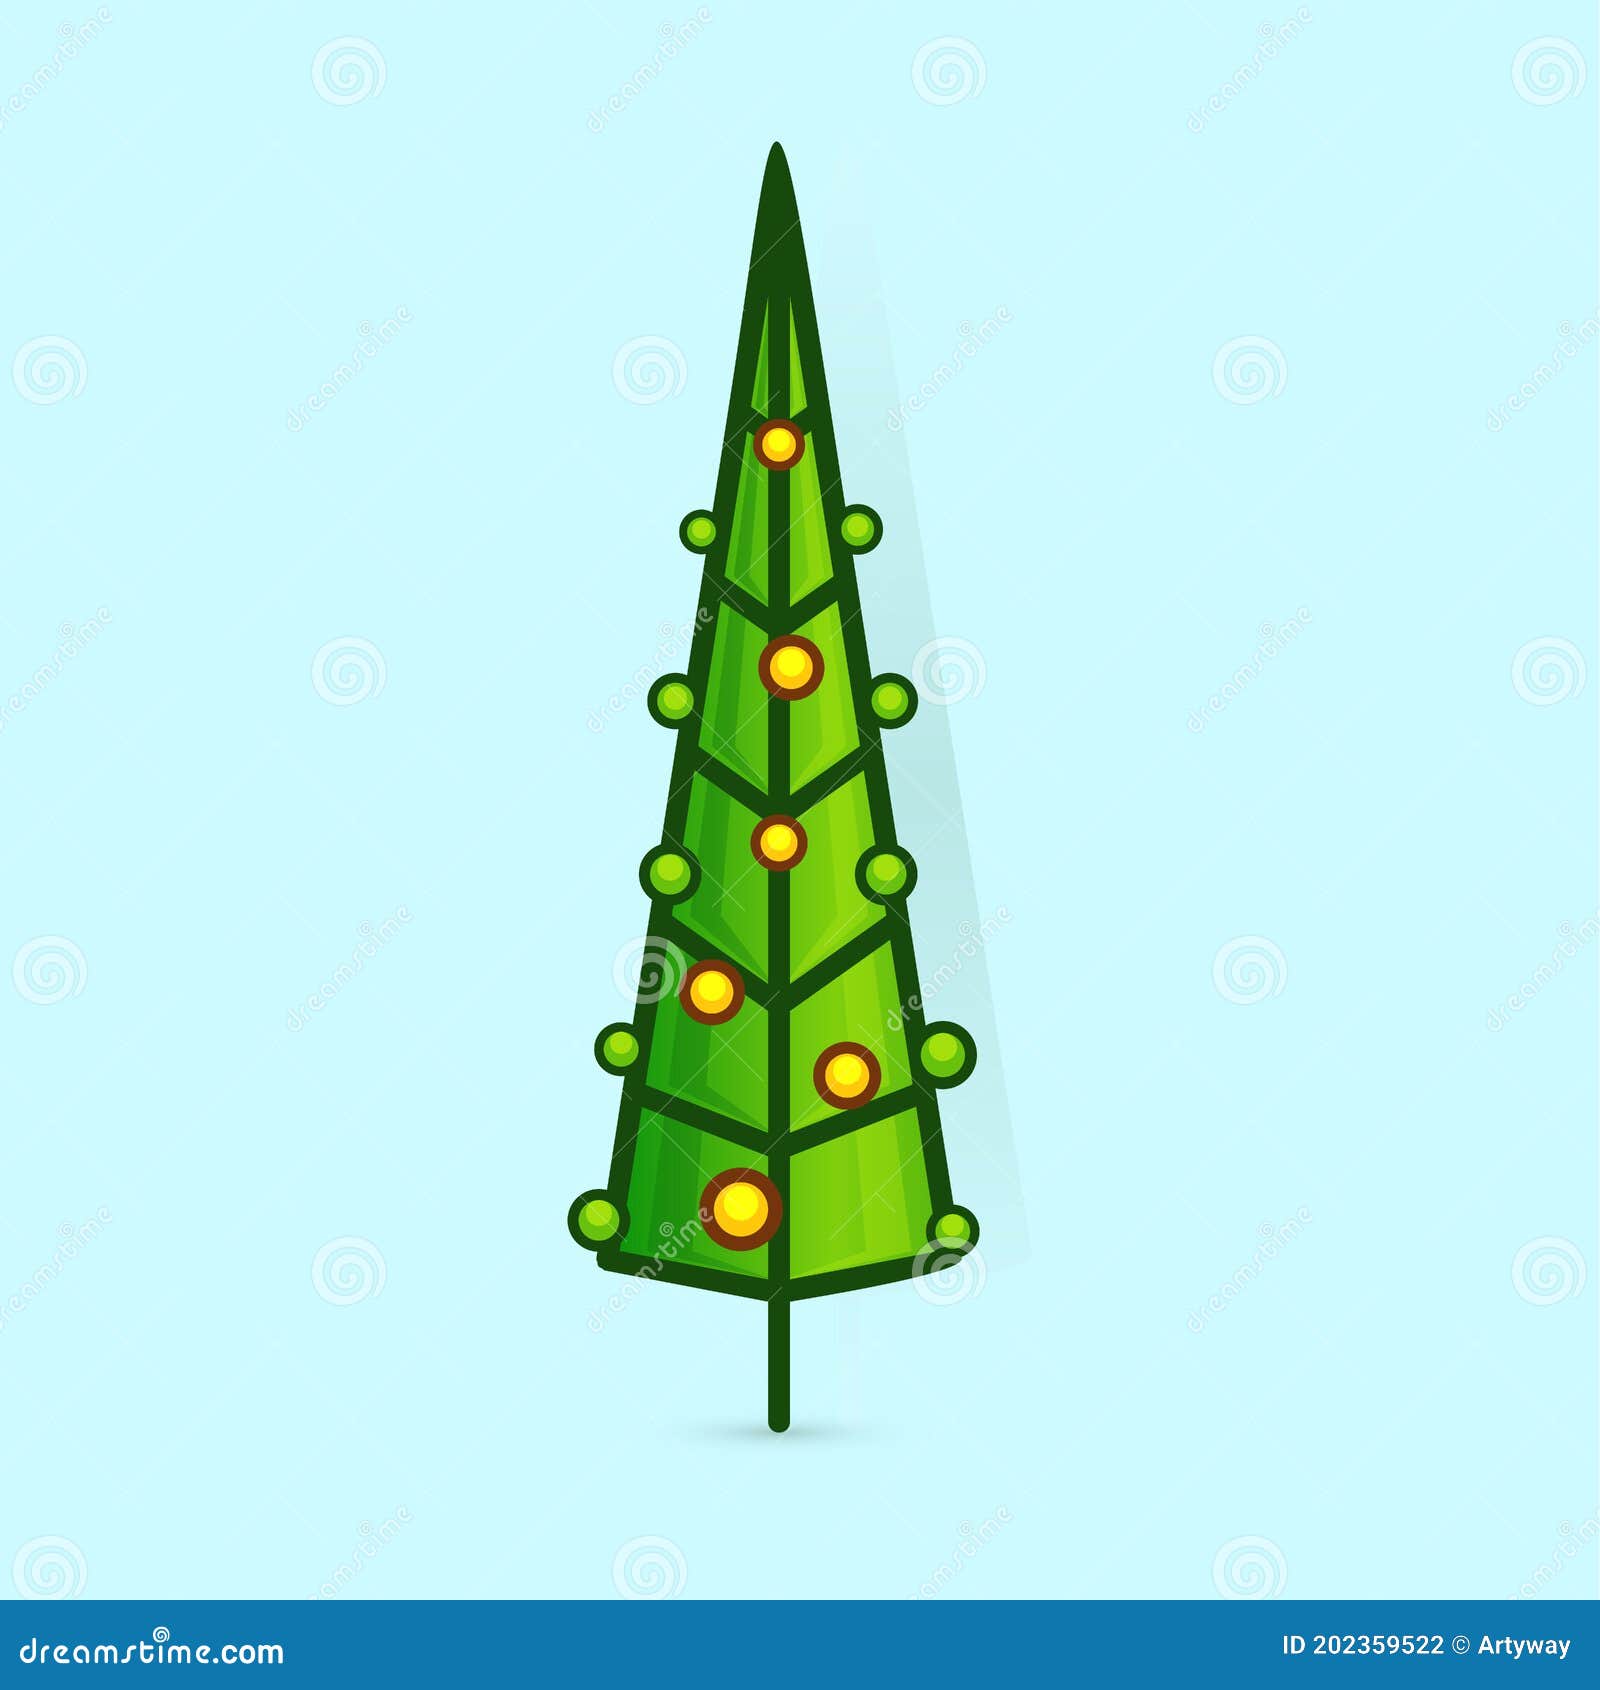 Christmas Tree Vector Icon Decorated Tree In Flat Line Art Style Green Pine For Design Of Greeting Cards And Stock Illustration Illustration Of Evergreen Season